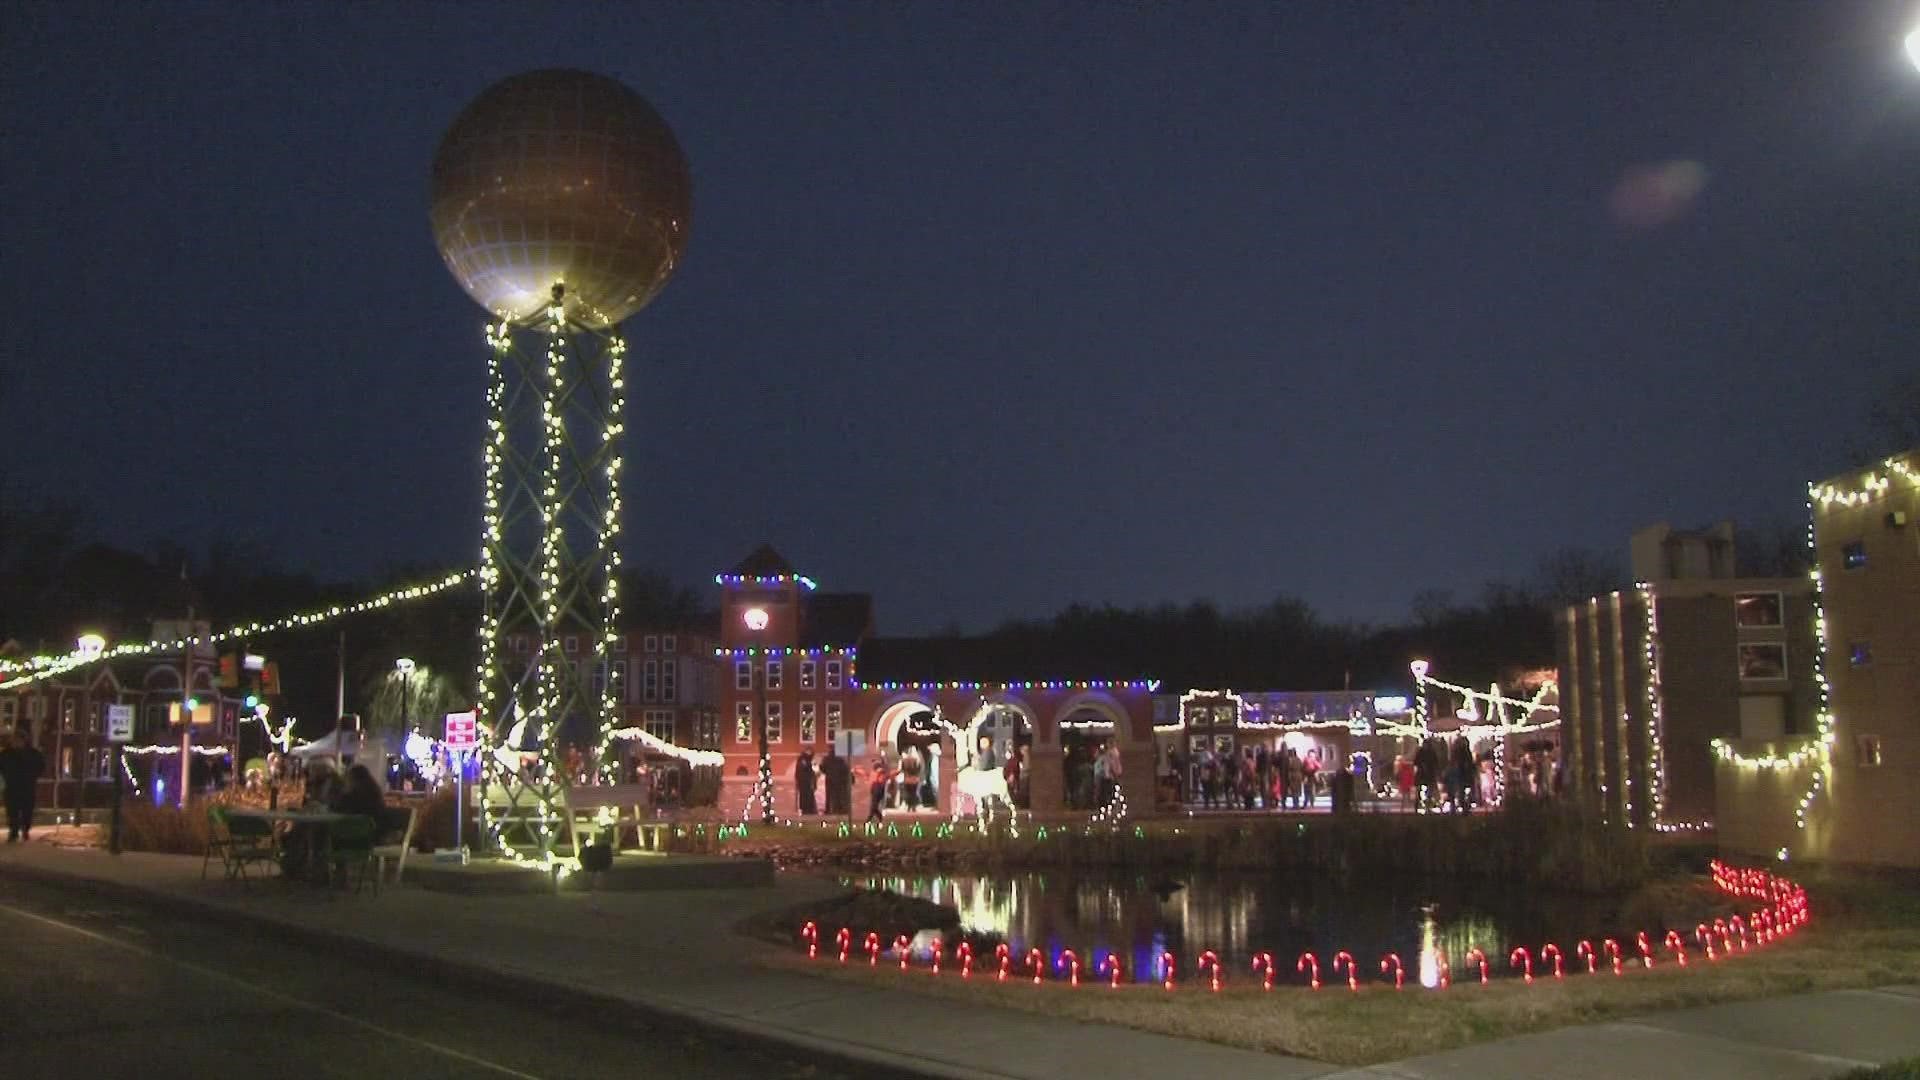 It opens up next Tuesday and stays open for several days through December 15.